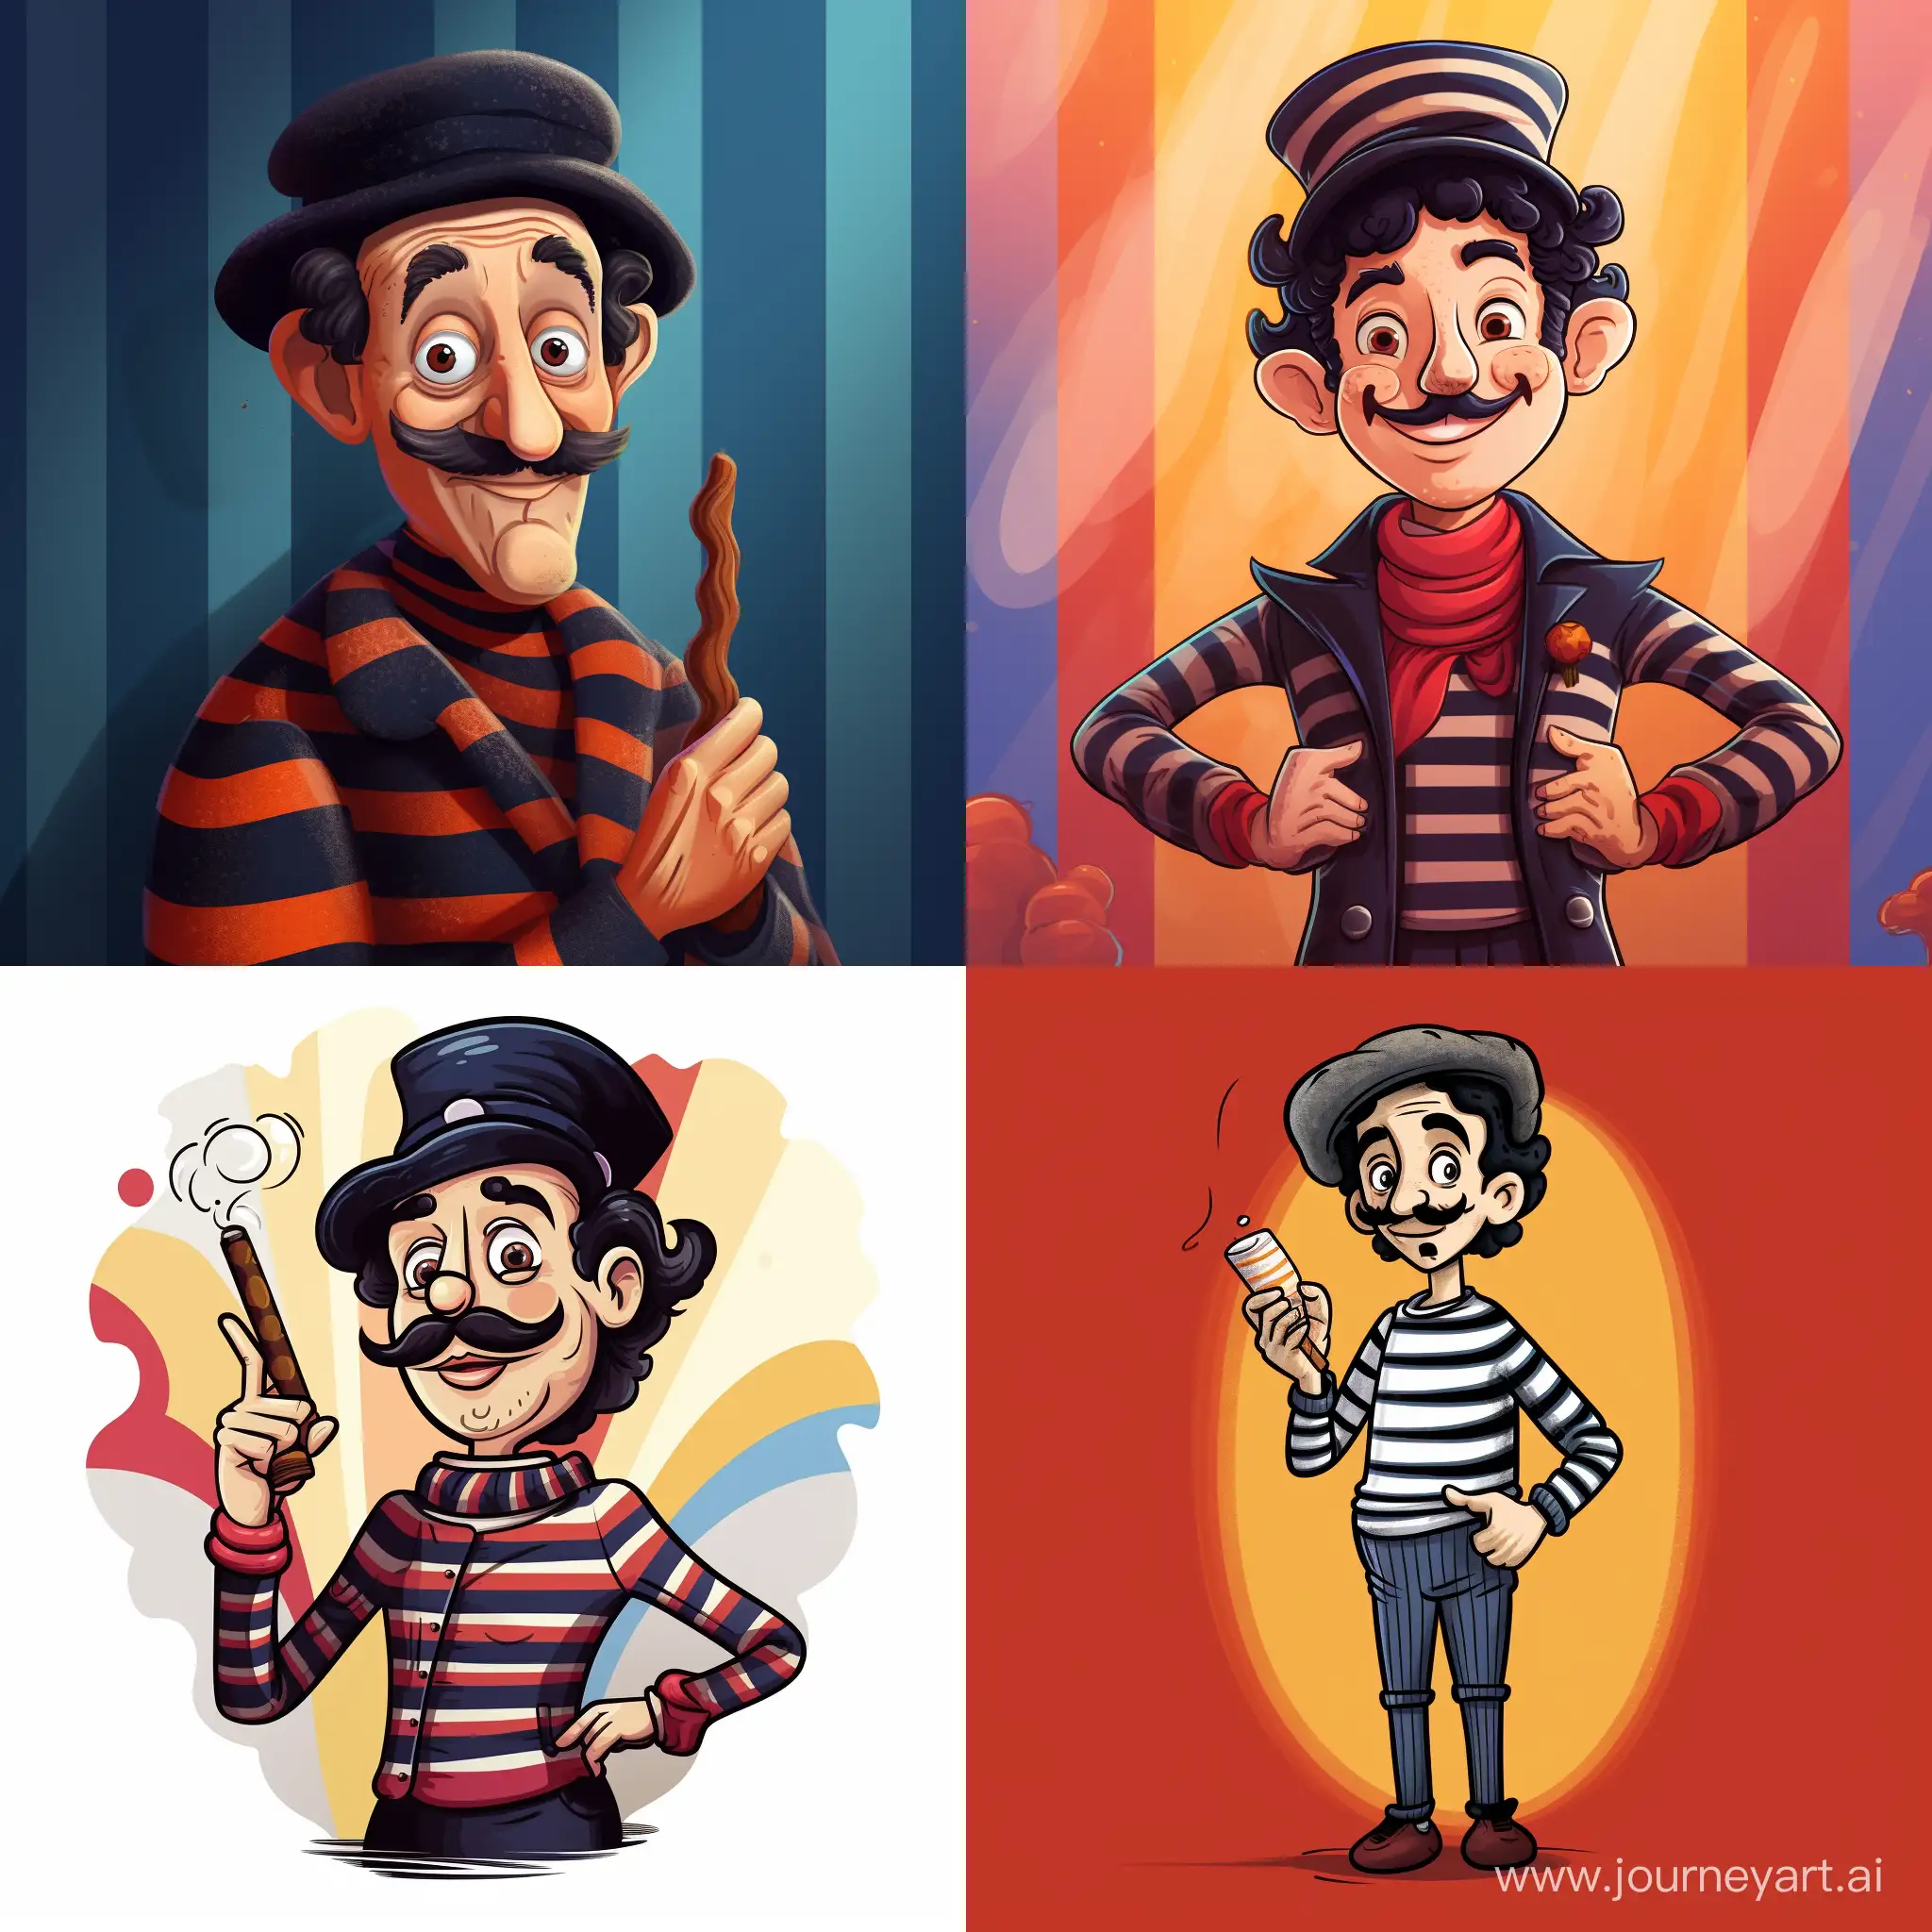 In a drawing cartoon art style. A character who is a caricature of the Frenchman with a baguette under his arm. The character has a beret and a striped sweater.